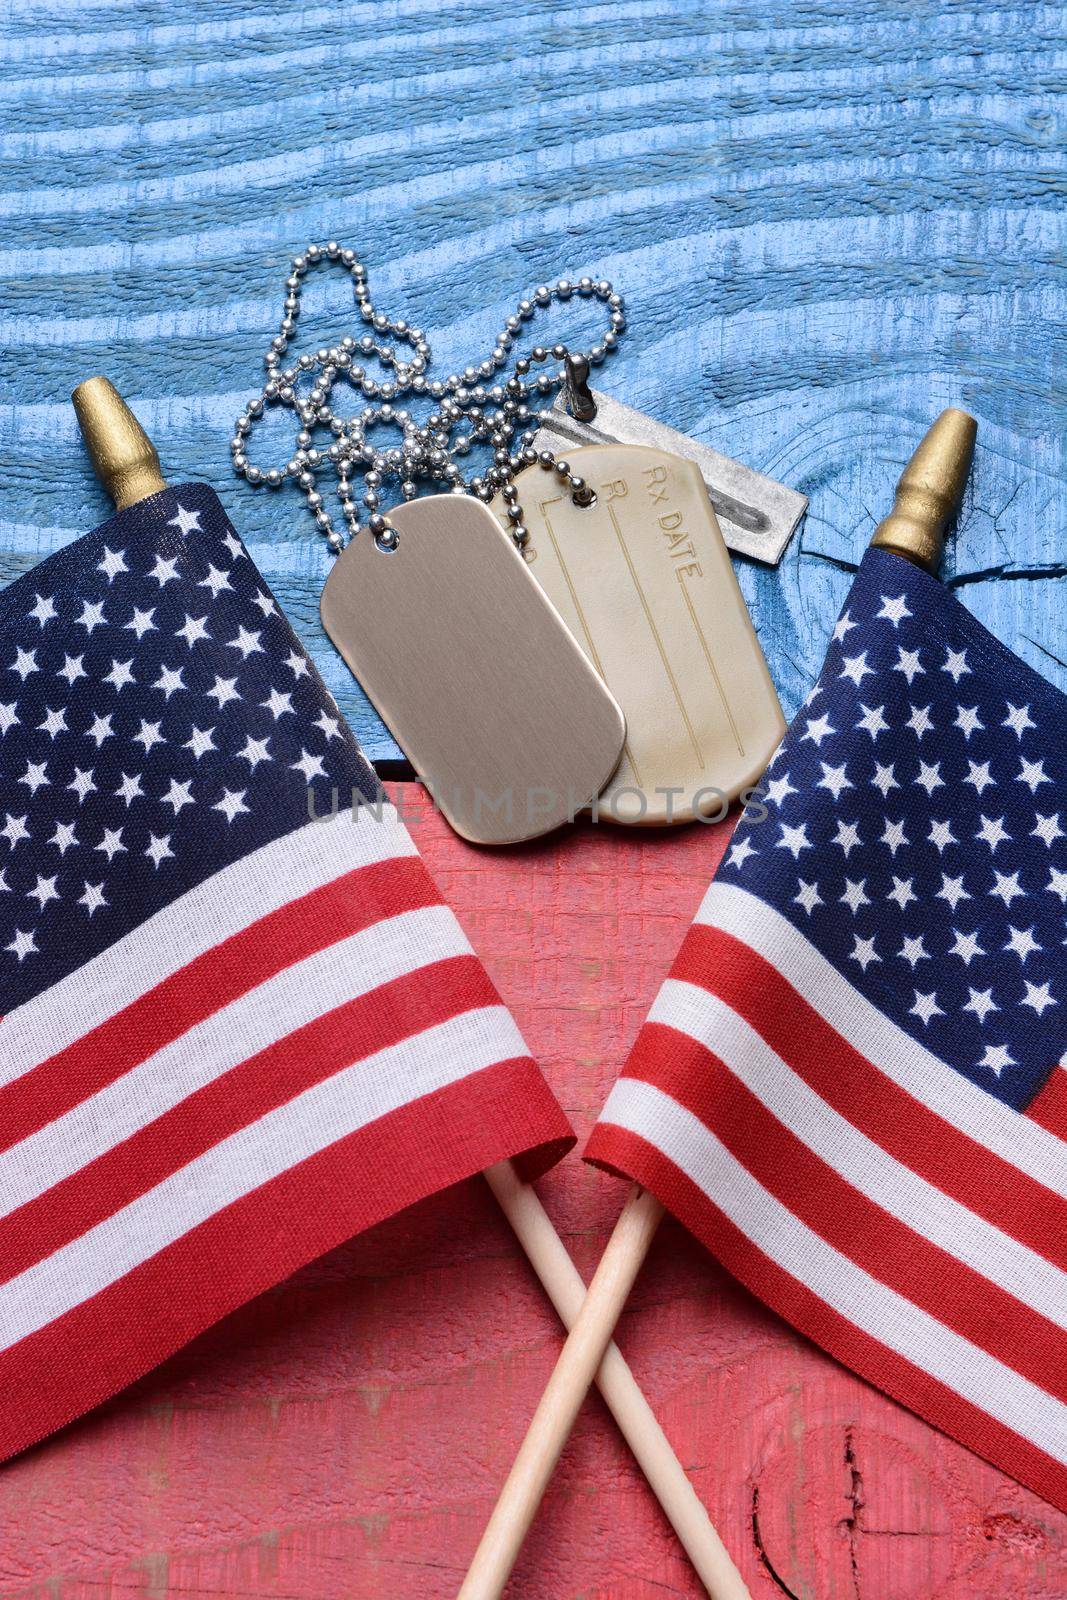 Dog Tags and Flags on Patriotic Table by sCukrov